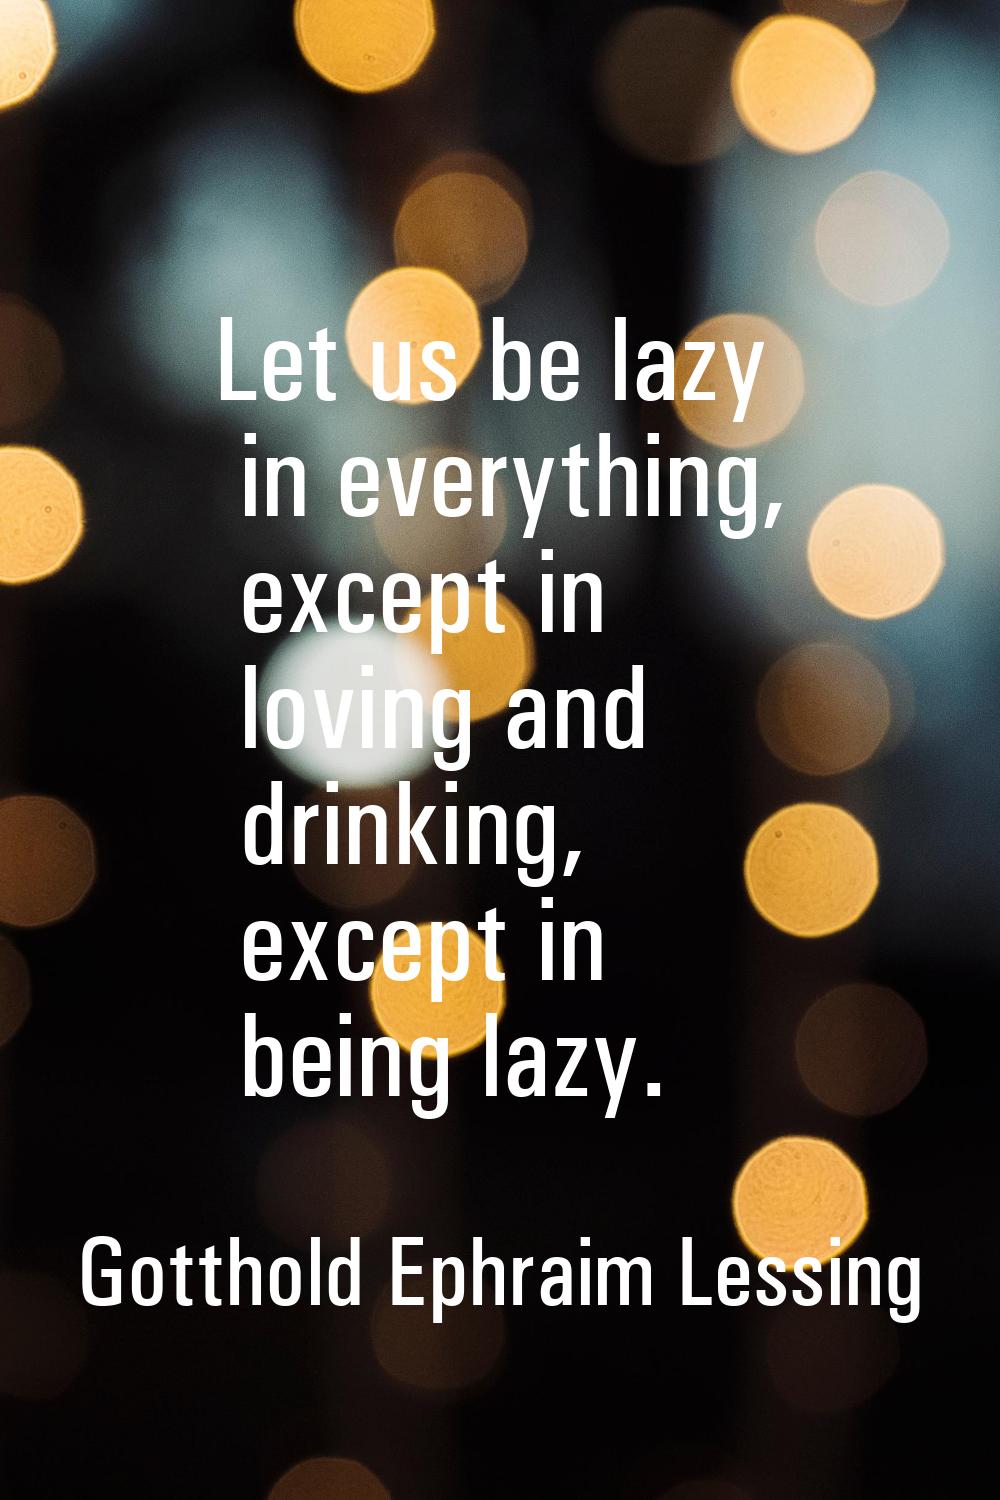 Let us be lazy in everything, except in loving and drinking, except in being lazy.